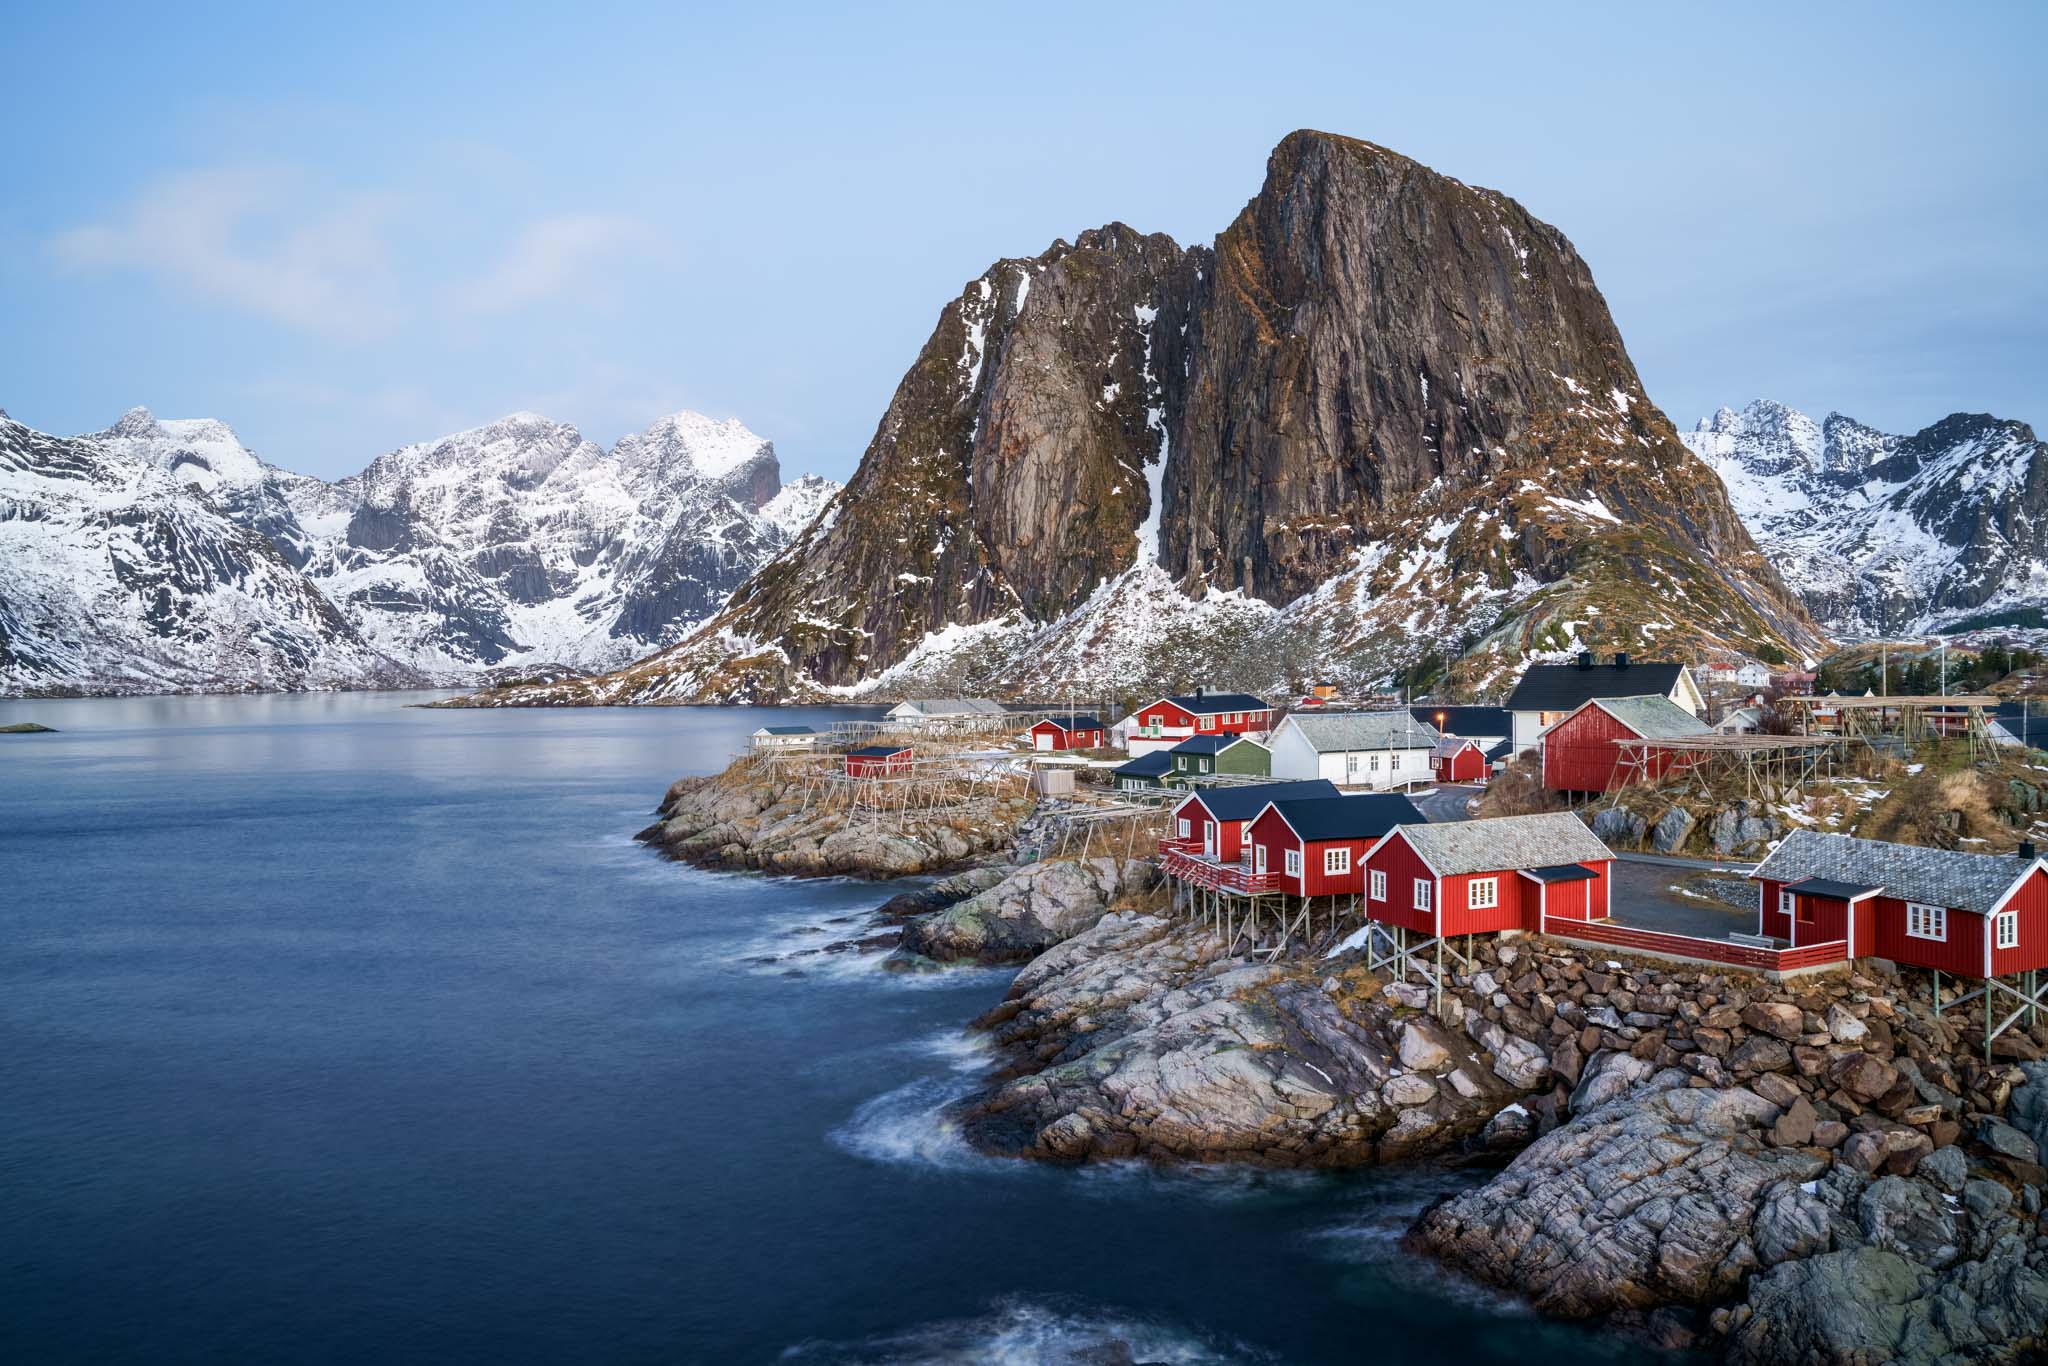 a small town on a rocky shore by a large mountain